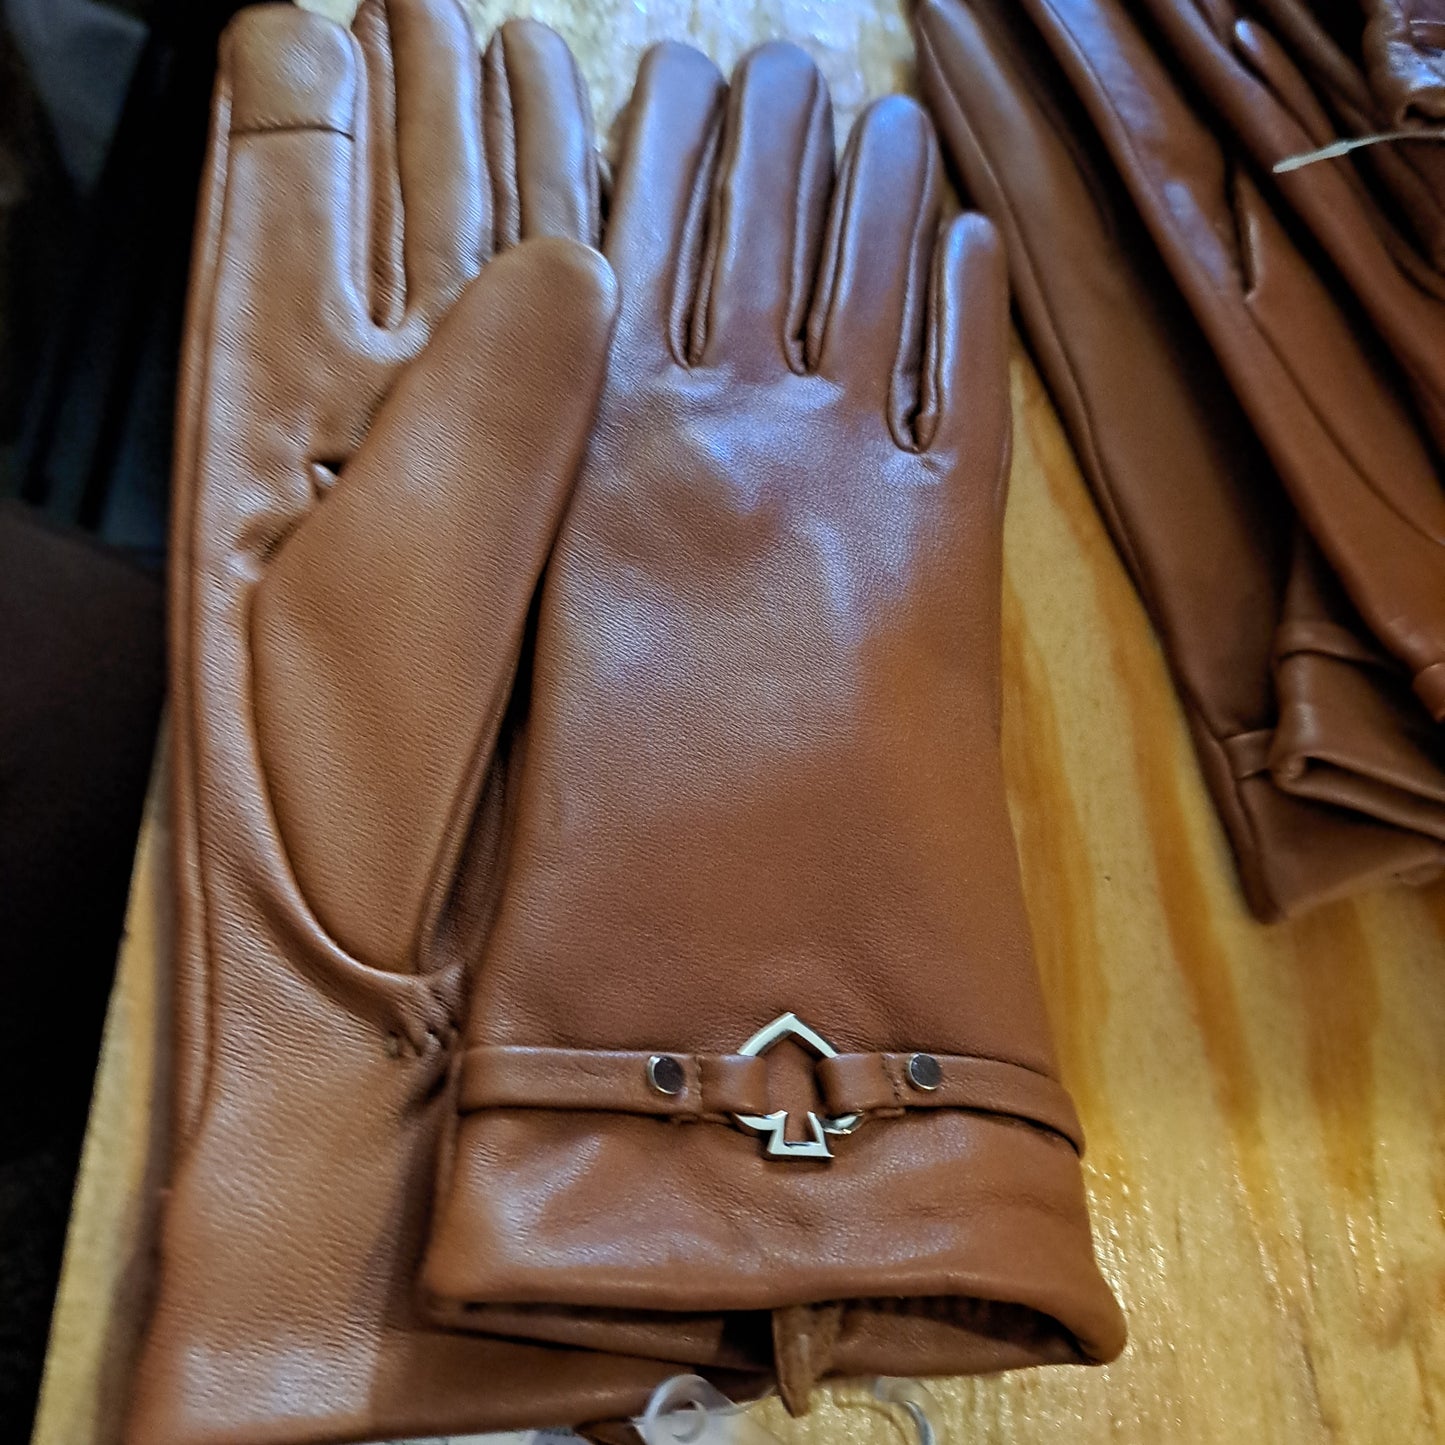 Kate Spade Brown Leather Gloves